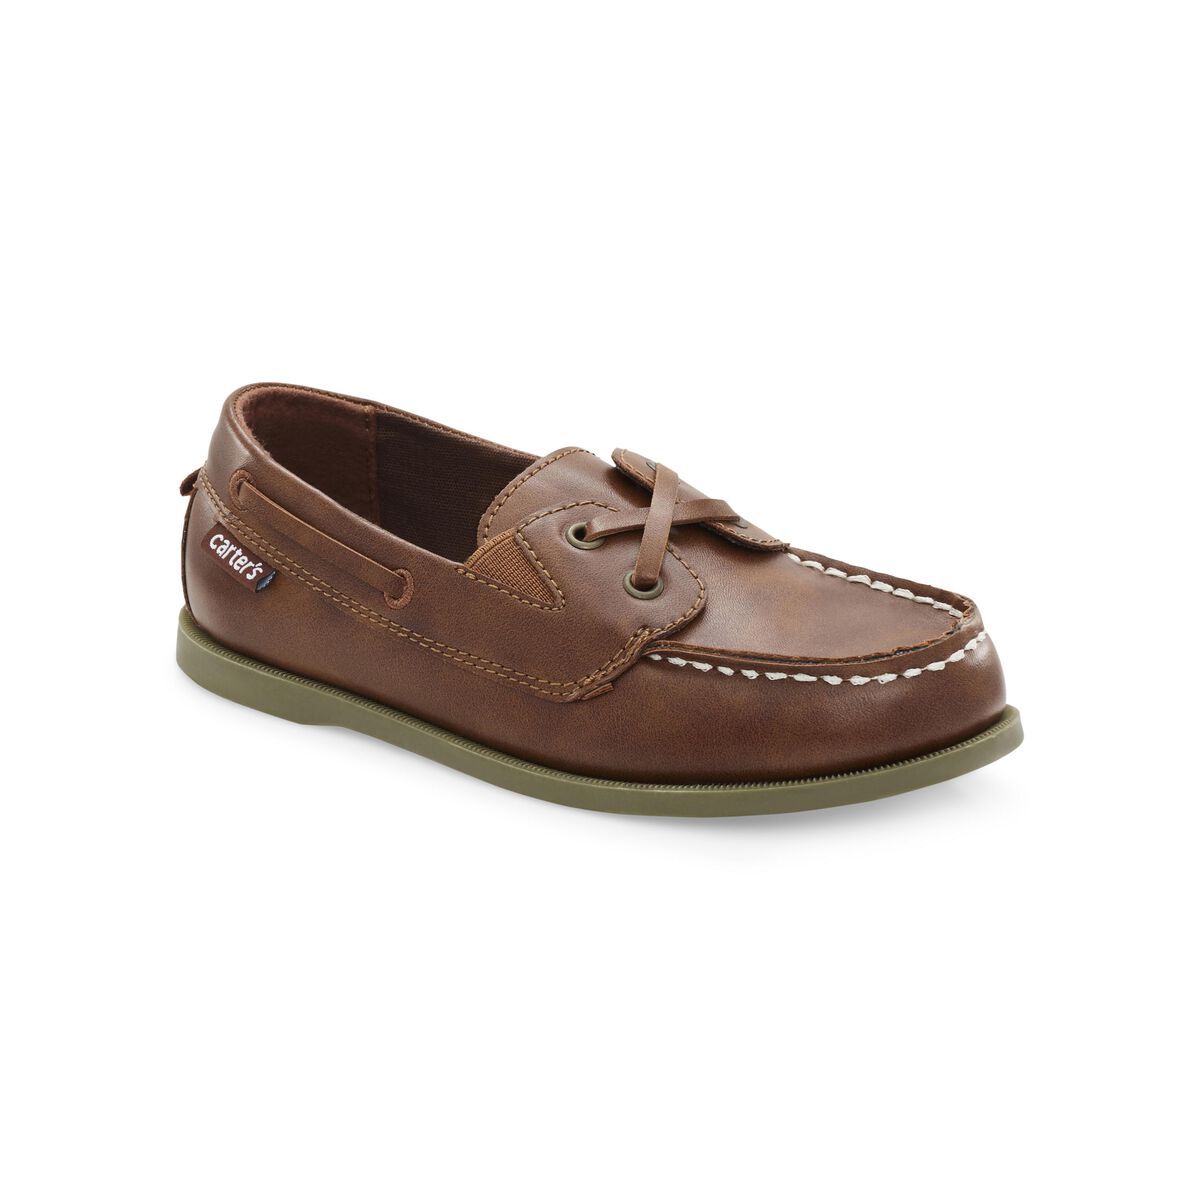 Brown Kid Boat Shoes | carters.com | Carter's